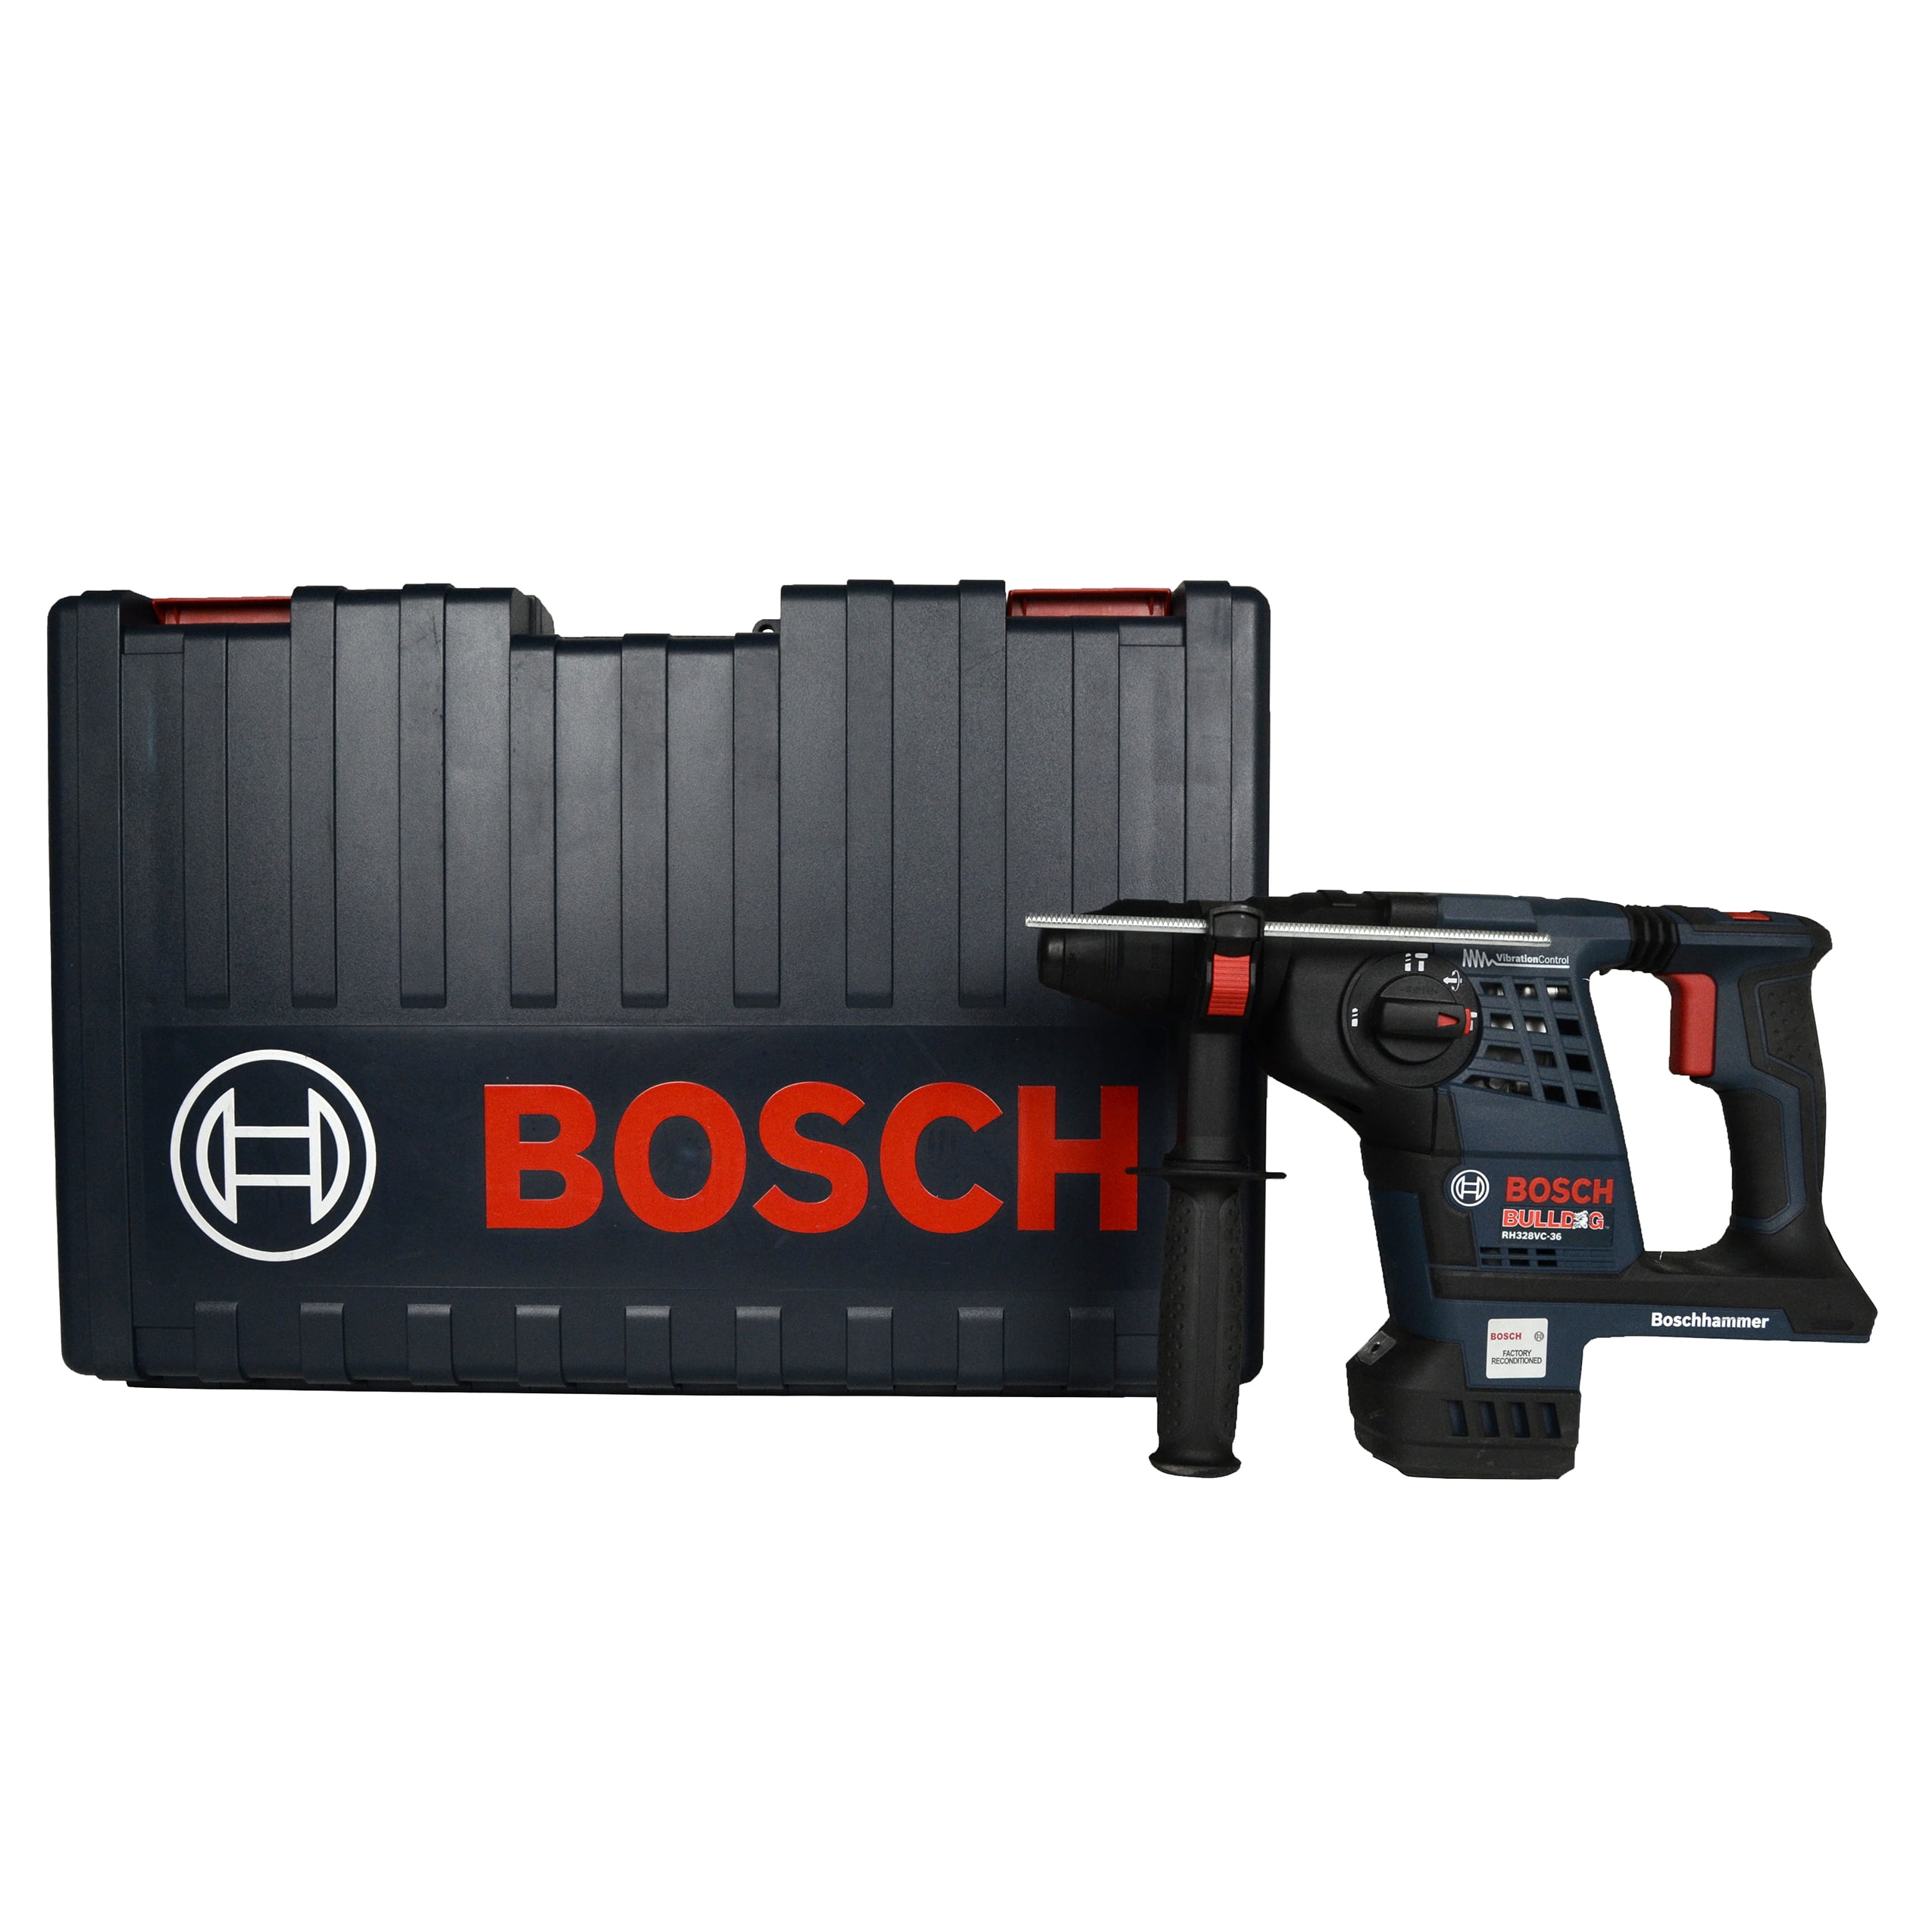 Bosch Reconditioned RH328VC-36 Bulldog 1-1/8-in Rotary Hammer - Case Tool Only - Walmart.com